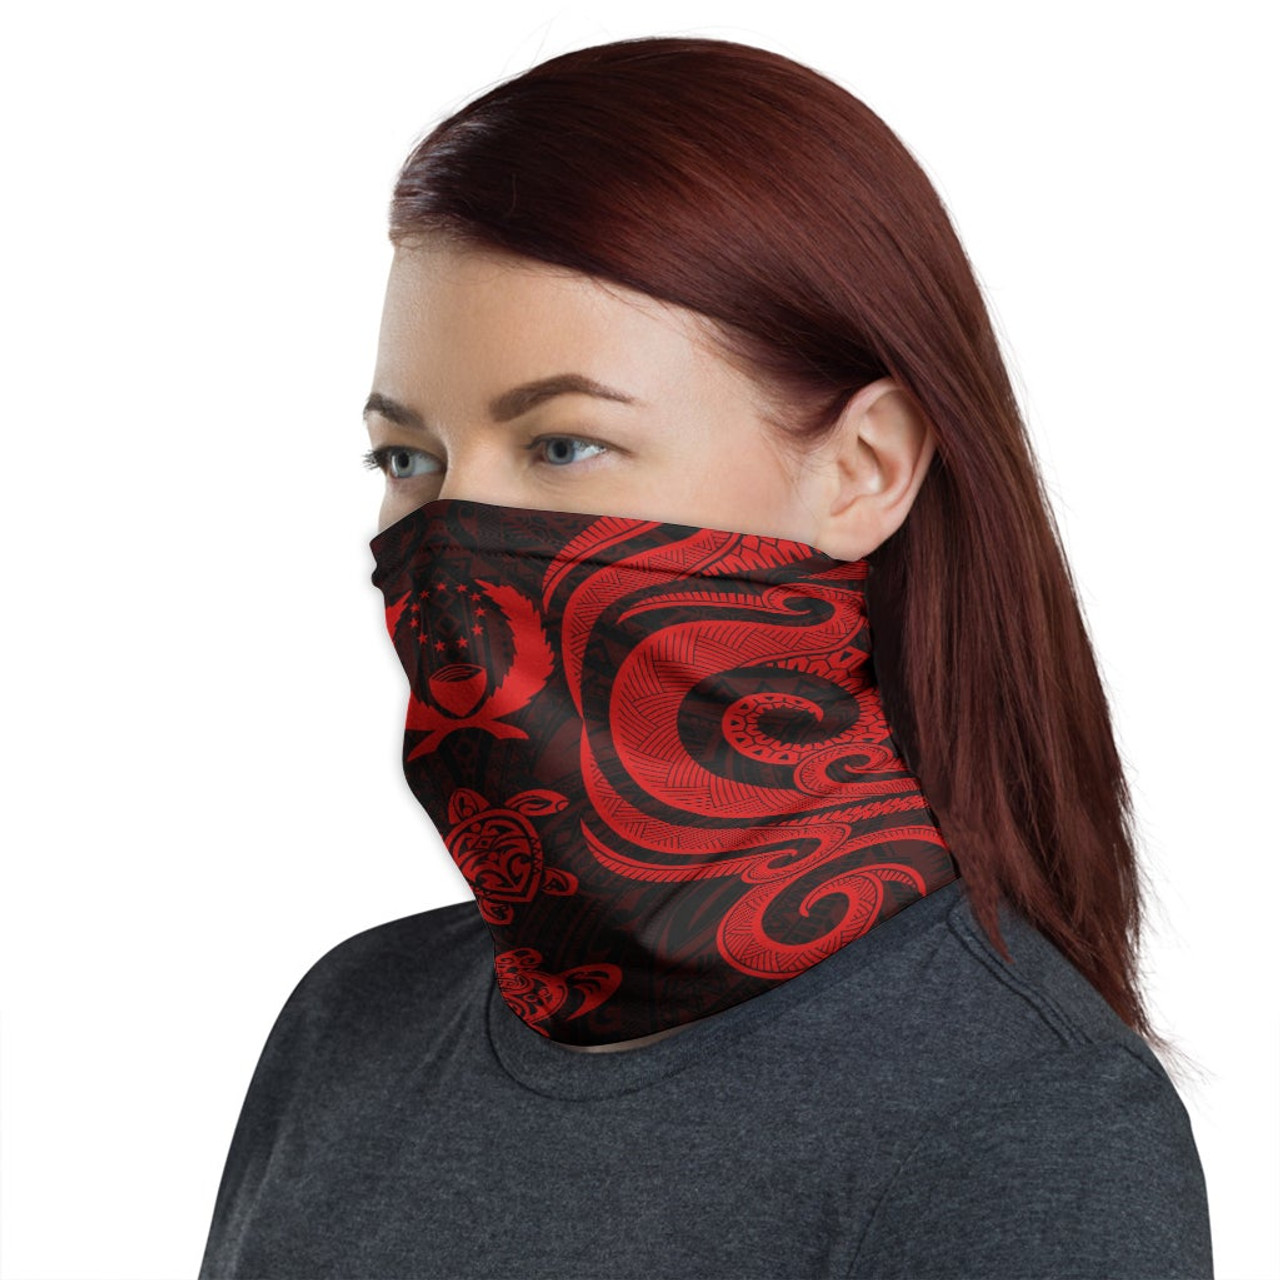 Pohnpei Neck Gaiter - Turtle Tentacle Red 1